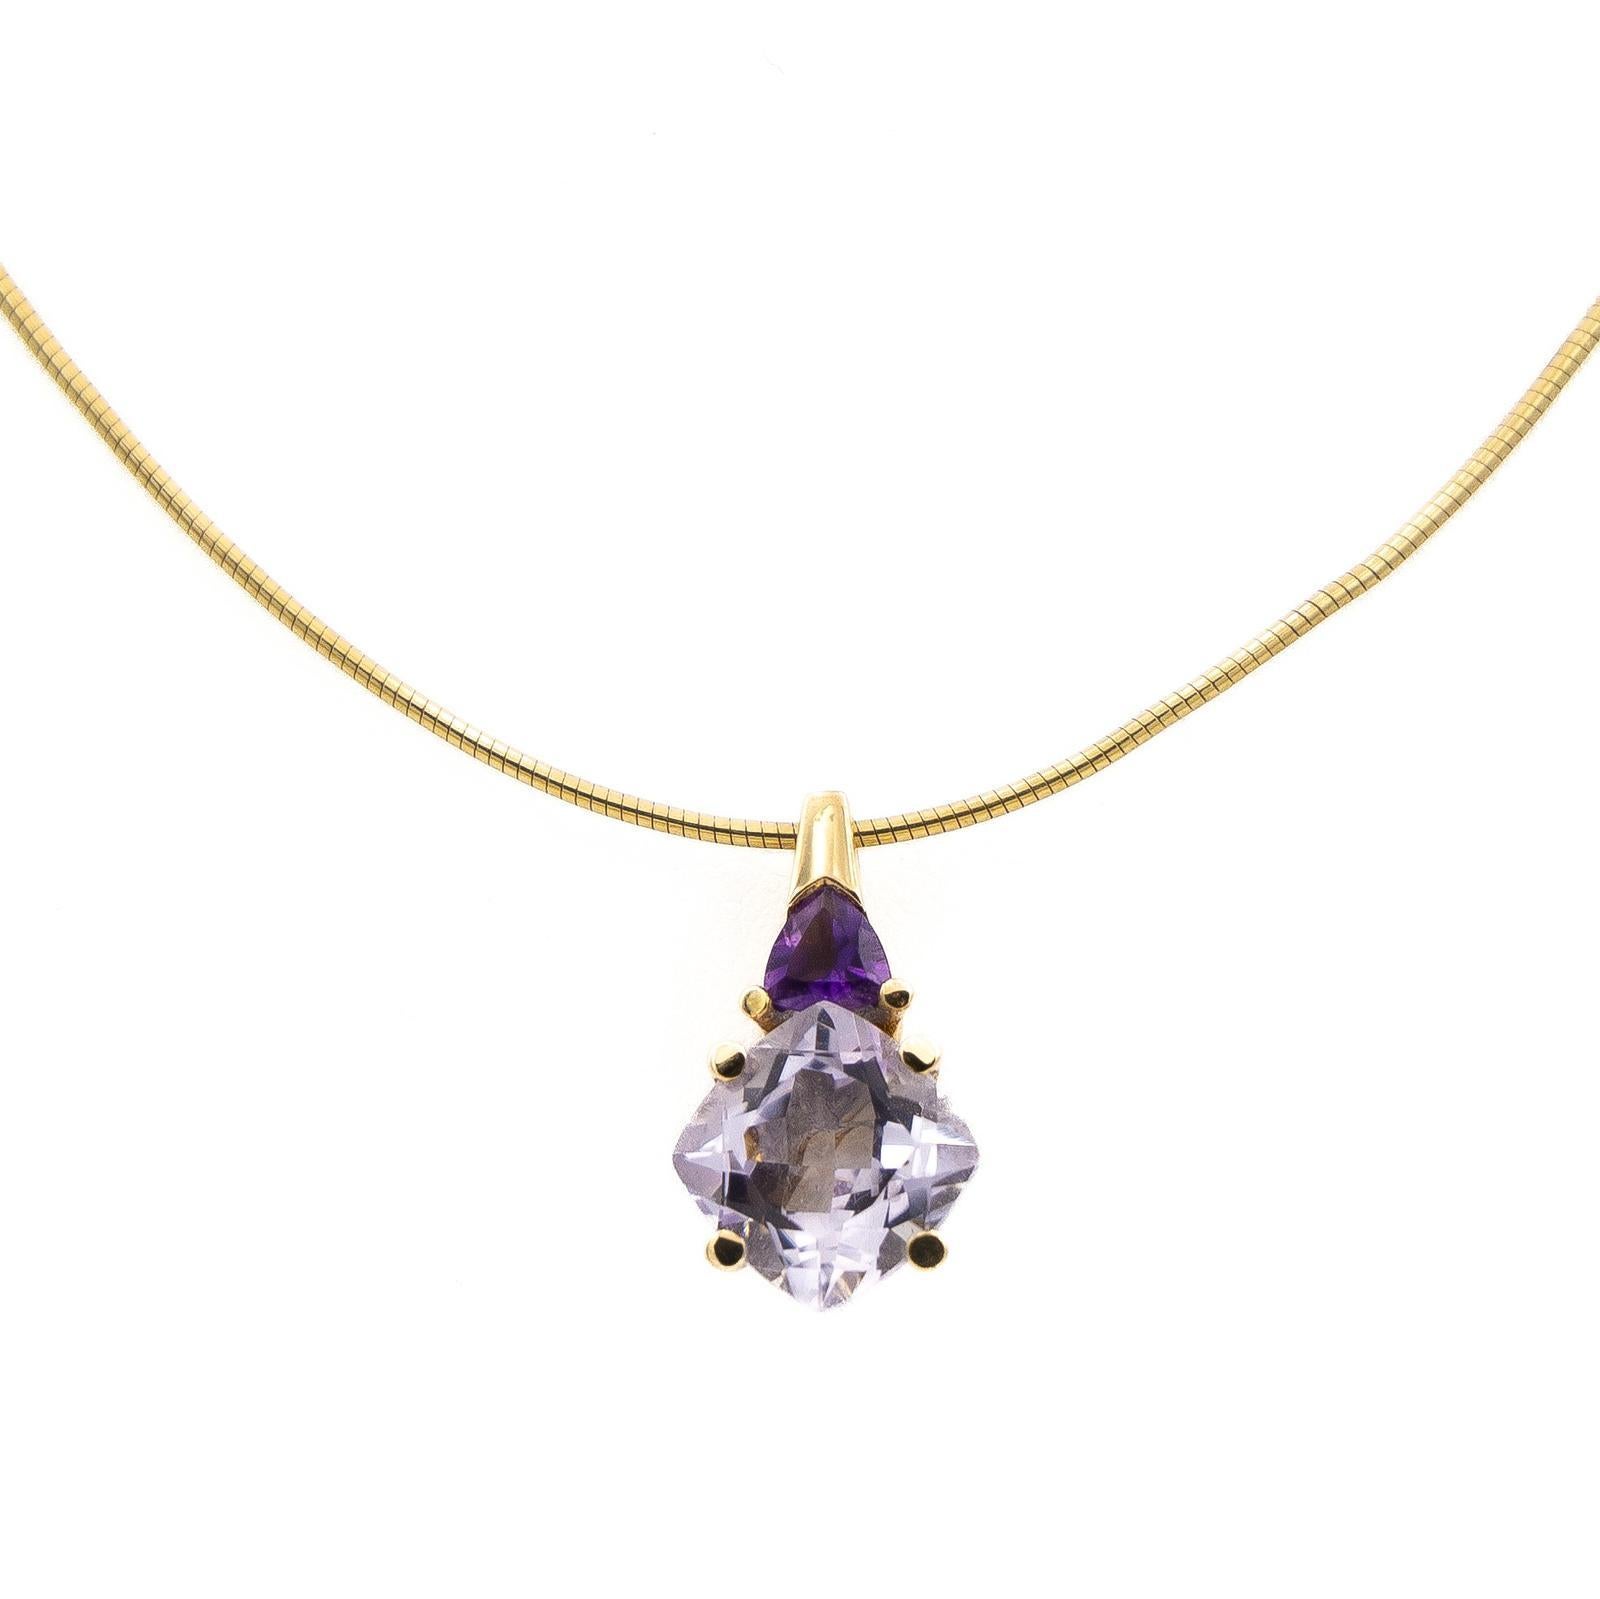 Necklace in yellow gold 750 thousandths (18 carats). pendant set with two amethysts. one cushion cut square about 4.35 cts. and the other trillion cut about 1.05 cts. Length: 43 cm. Dimensions: 2.05 x 1.20 cm. Total weight: 8.93. HallmarkEagle head.